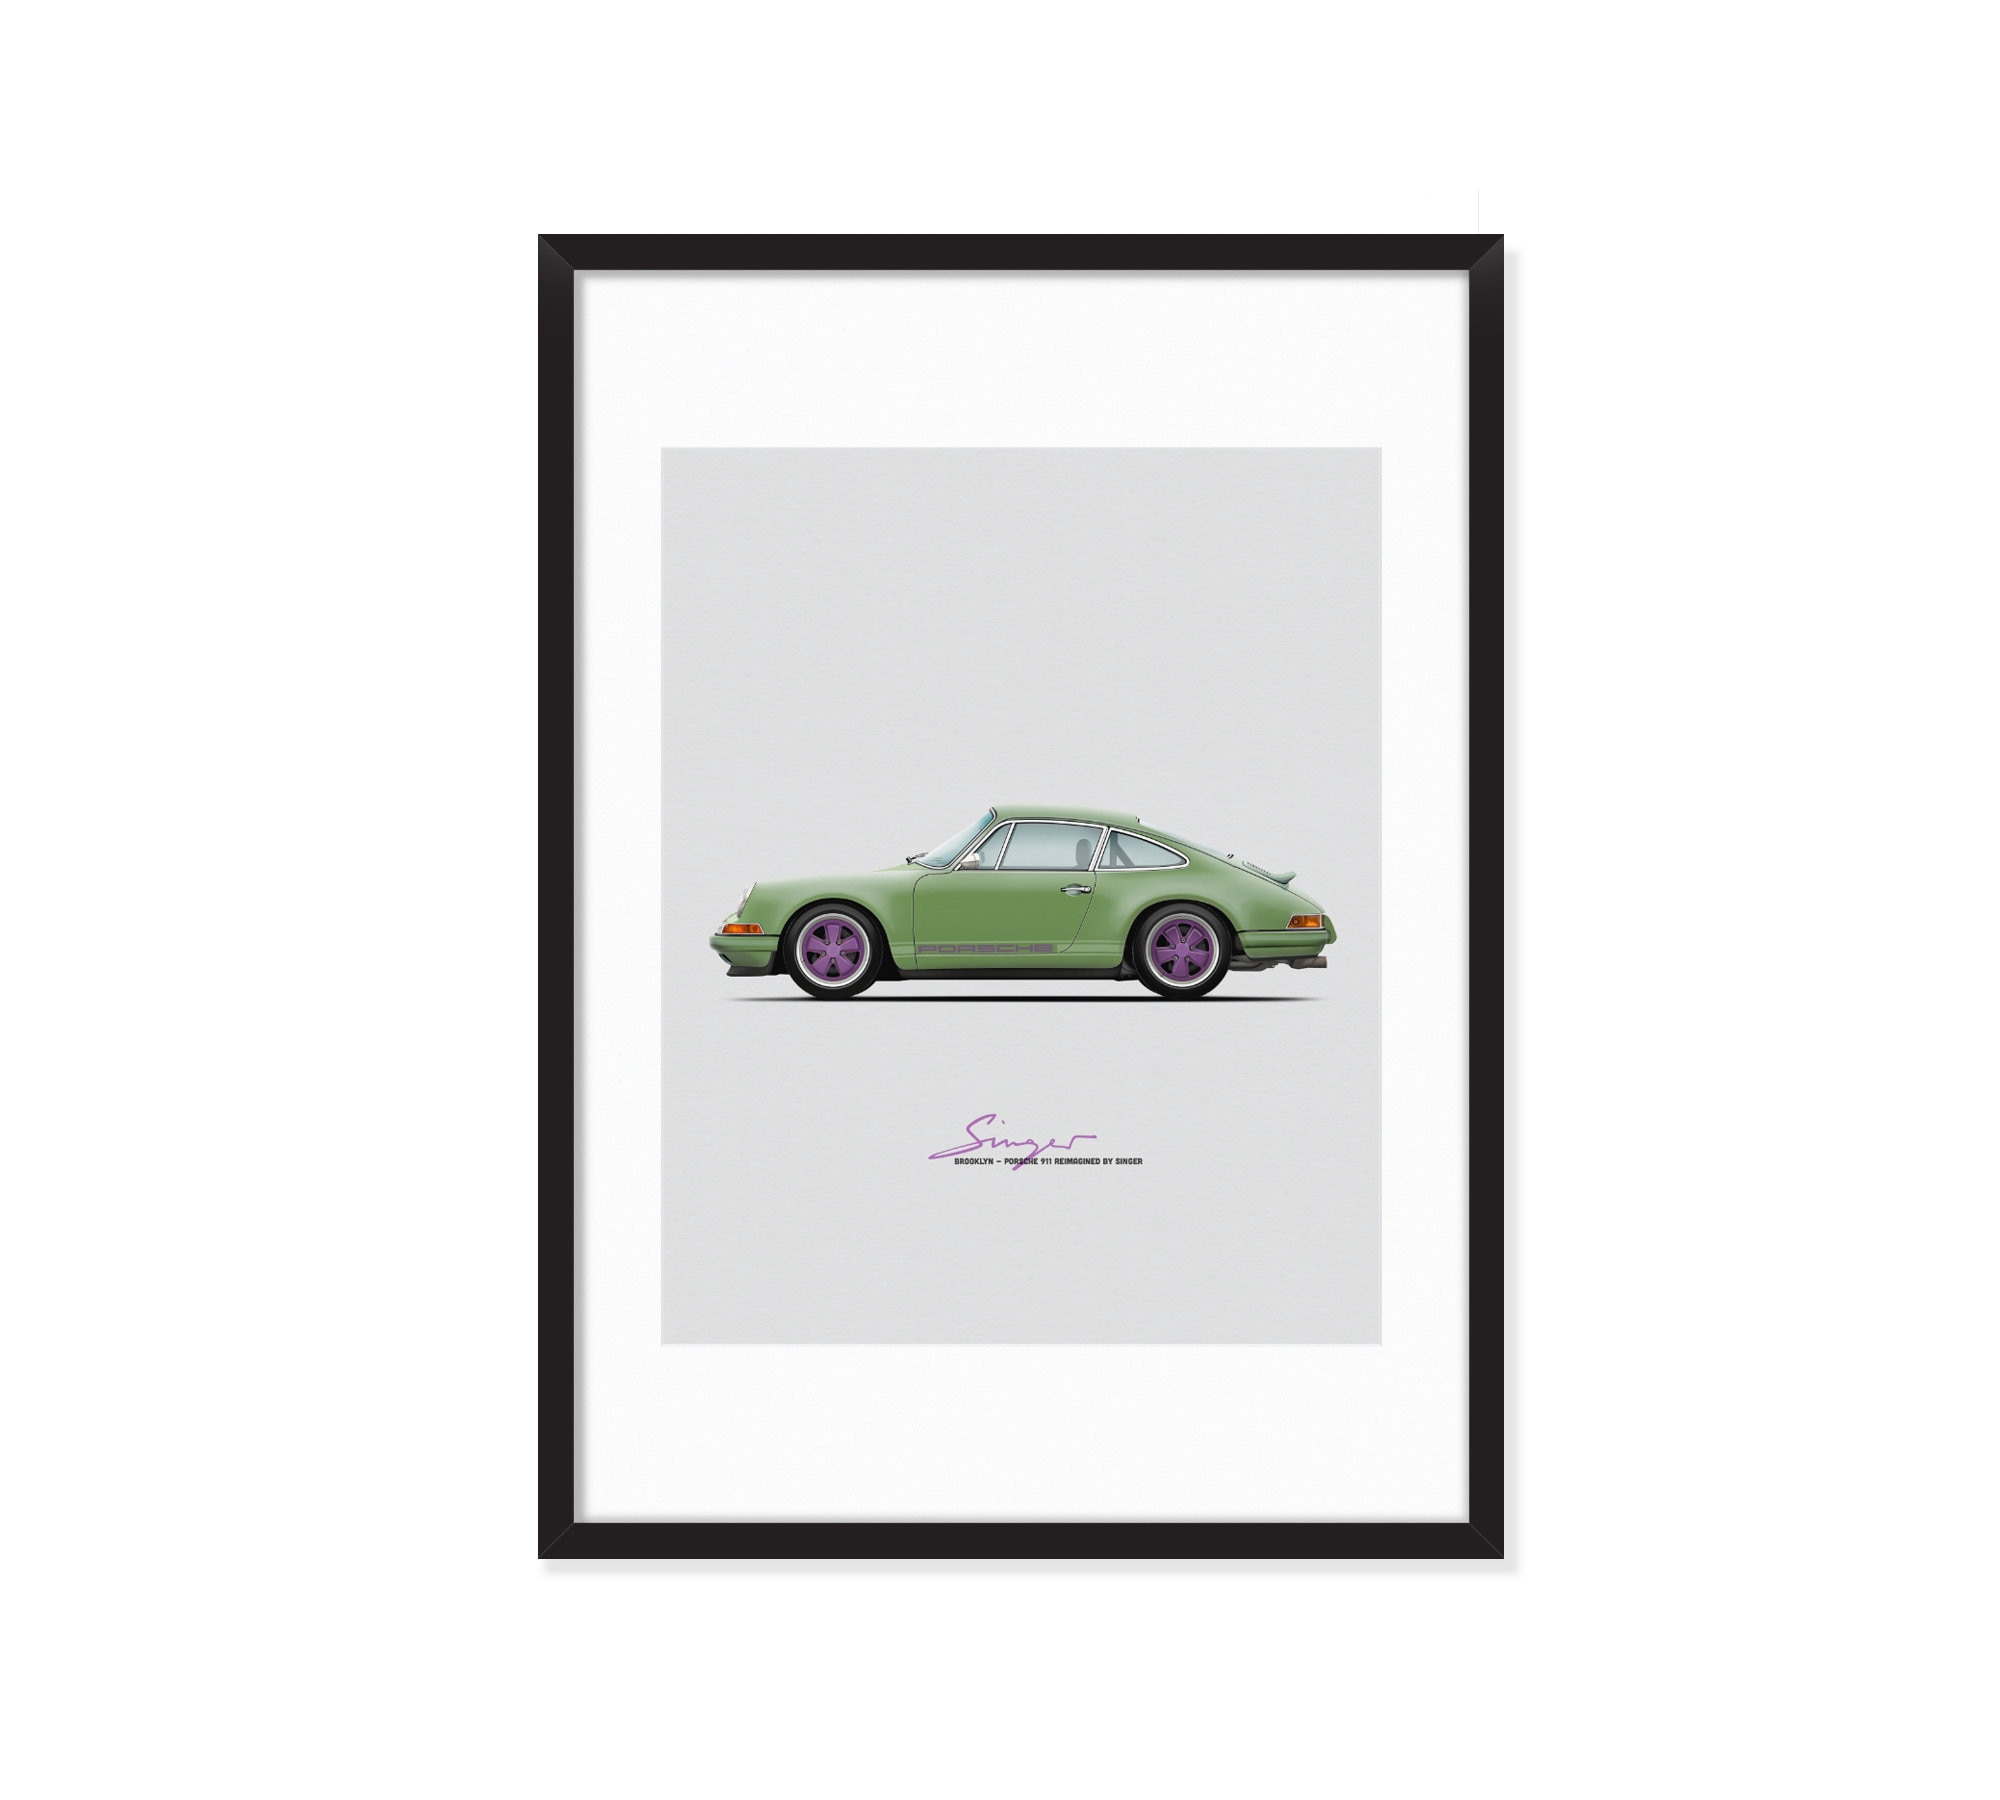 Brooklyn Porsche 911 Reimagined by Singer car poster - Etsy 日本